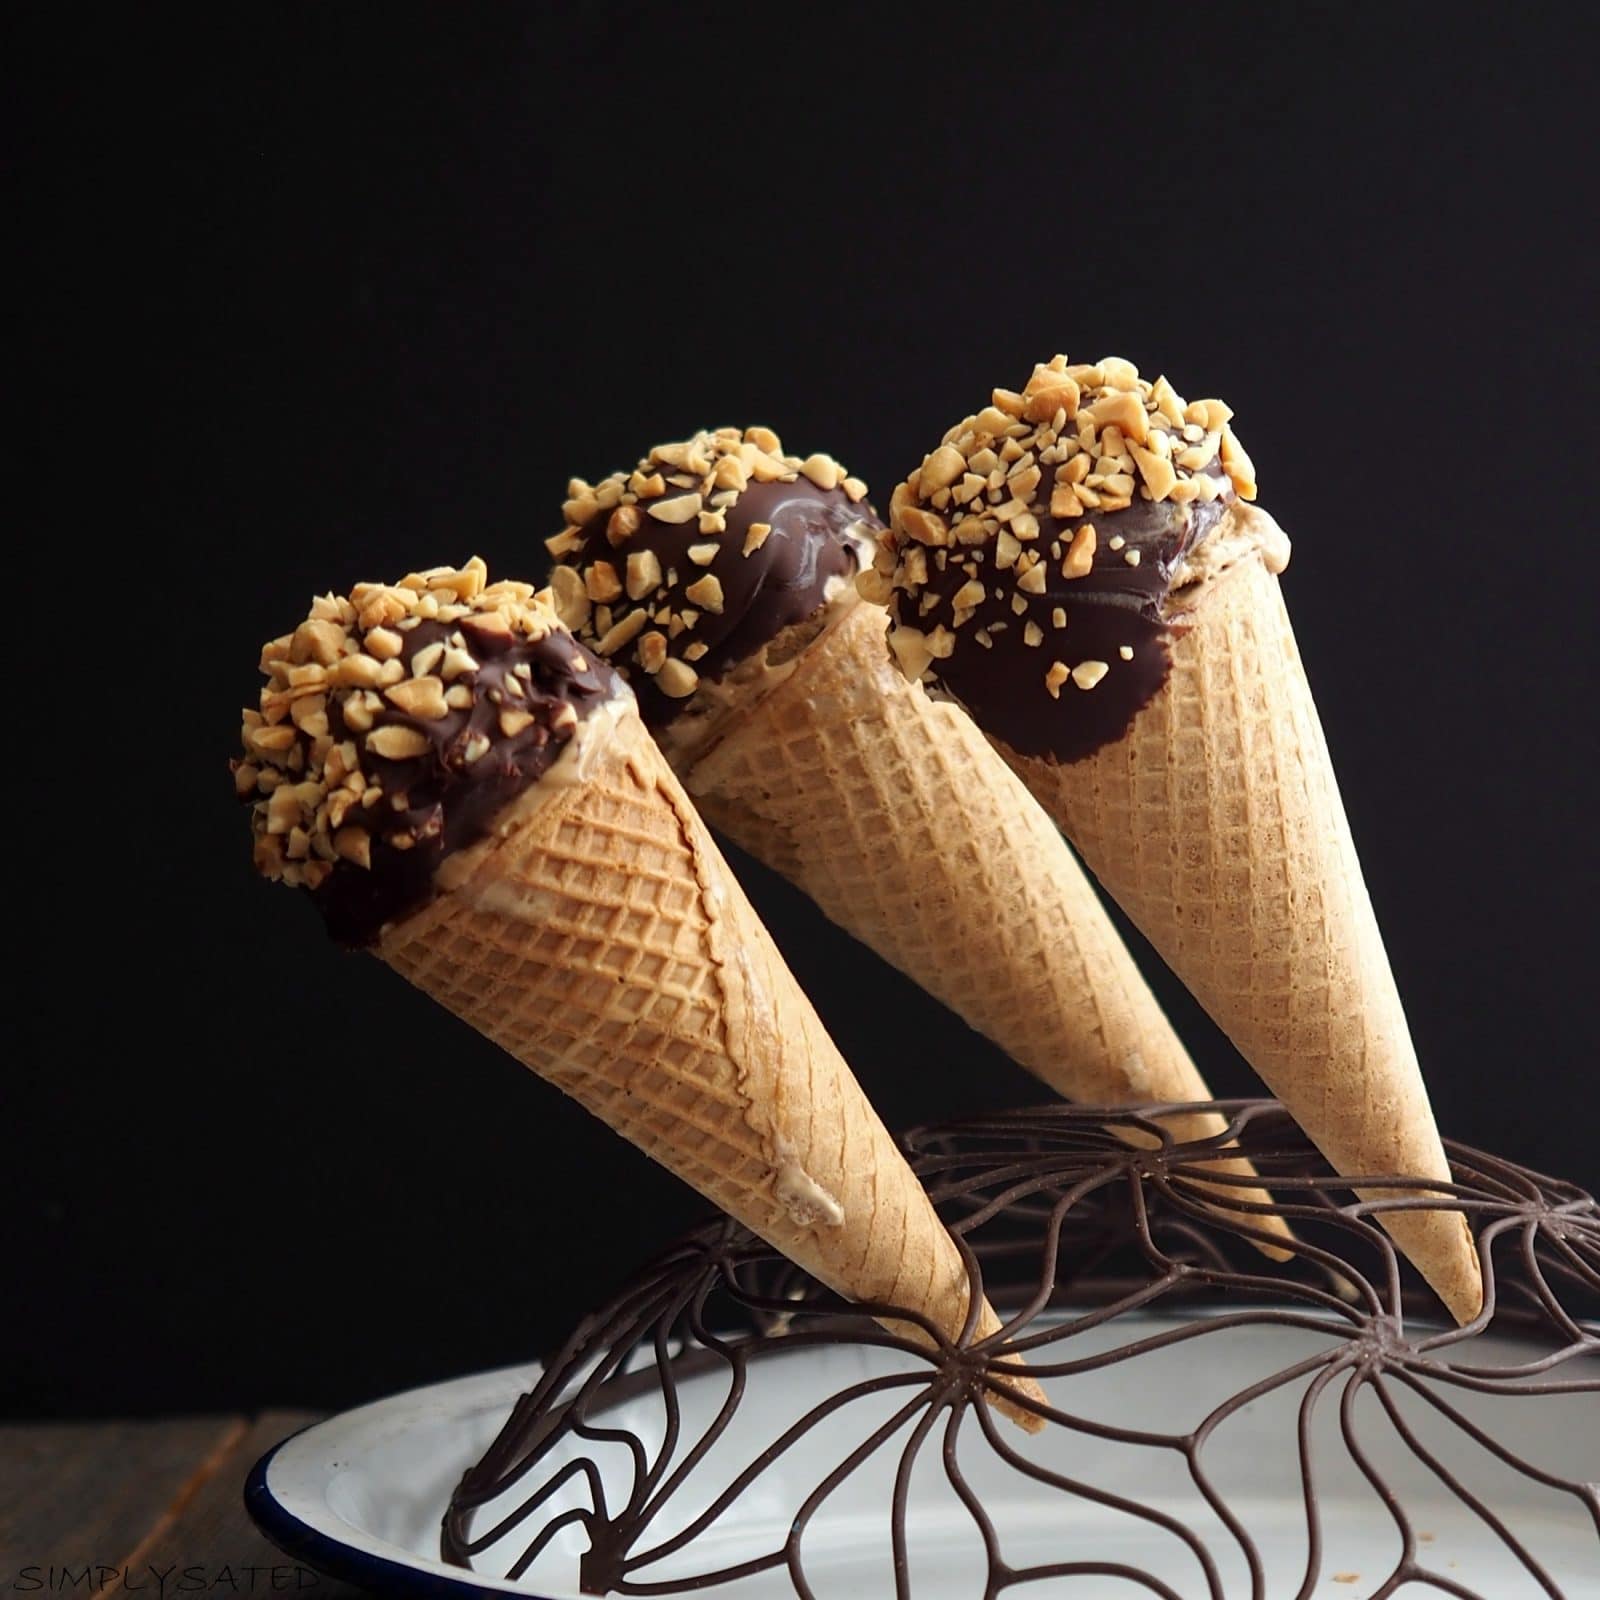 Homemade Drumsticks bring out the "kid" in each of us-just Imagine the ice cream truck jingle and waiting at the curb for your very special ice cream treat.